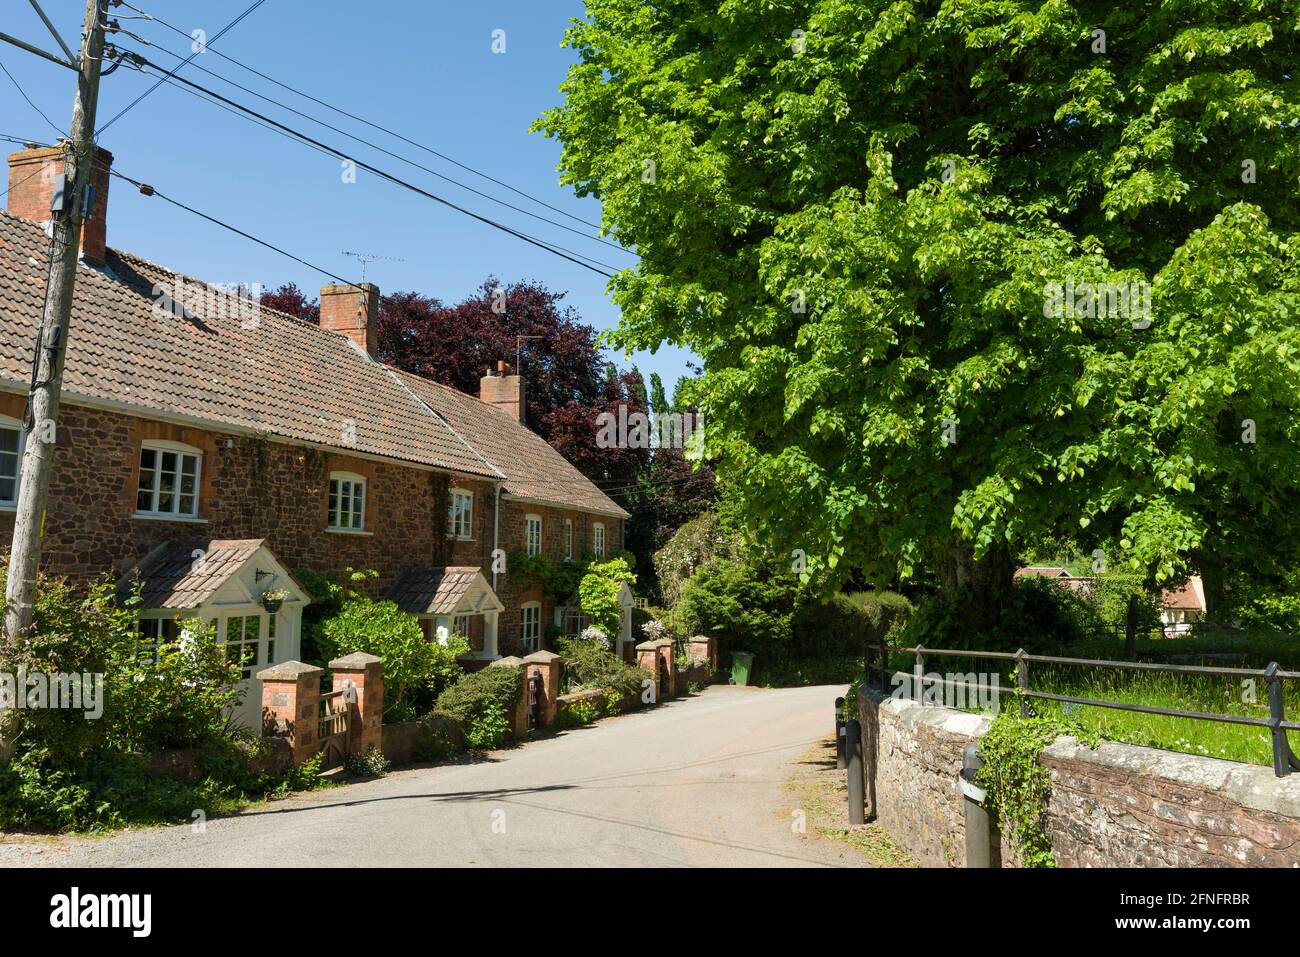 Cottages in village of Over Stowey in the Quantock Hills, Somerset, England. Stock Photo